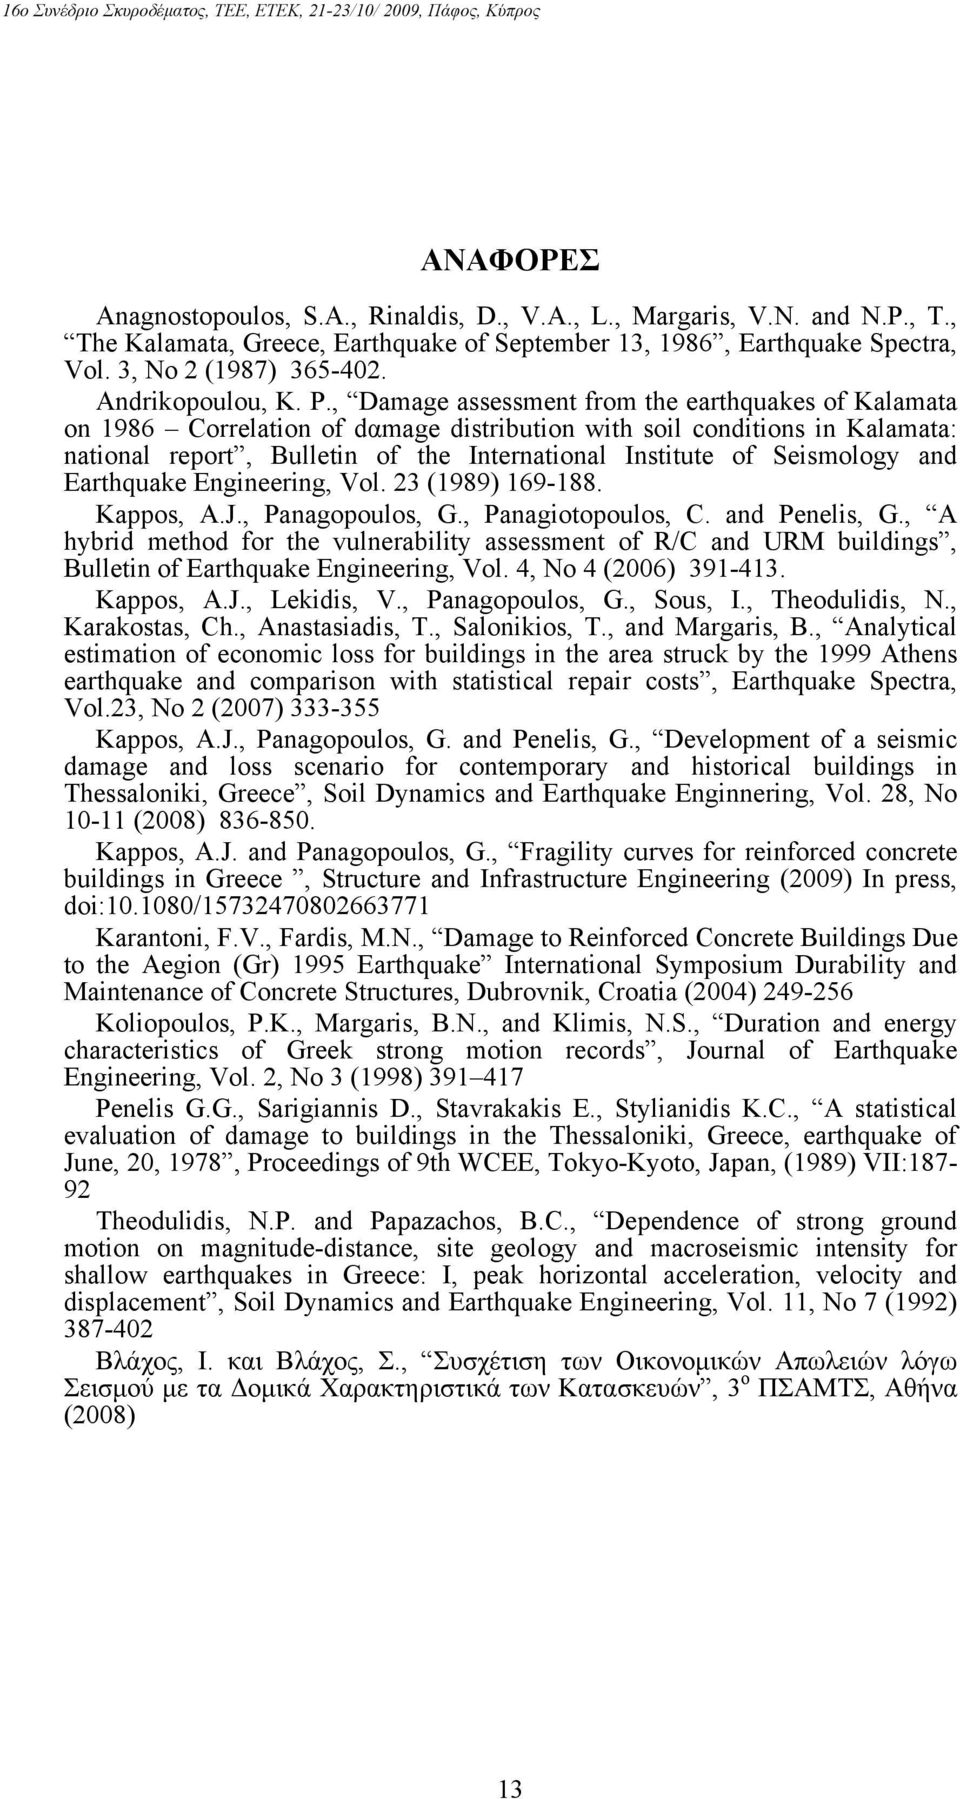 , Damage assessment from the earthquakes of Kalamata on 1986 Correlation of dαmage distribution with soil conditions in Kalamata: national report, Bulletin of the International Institute of